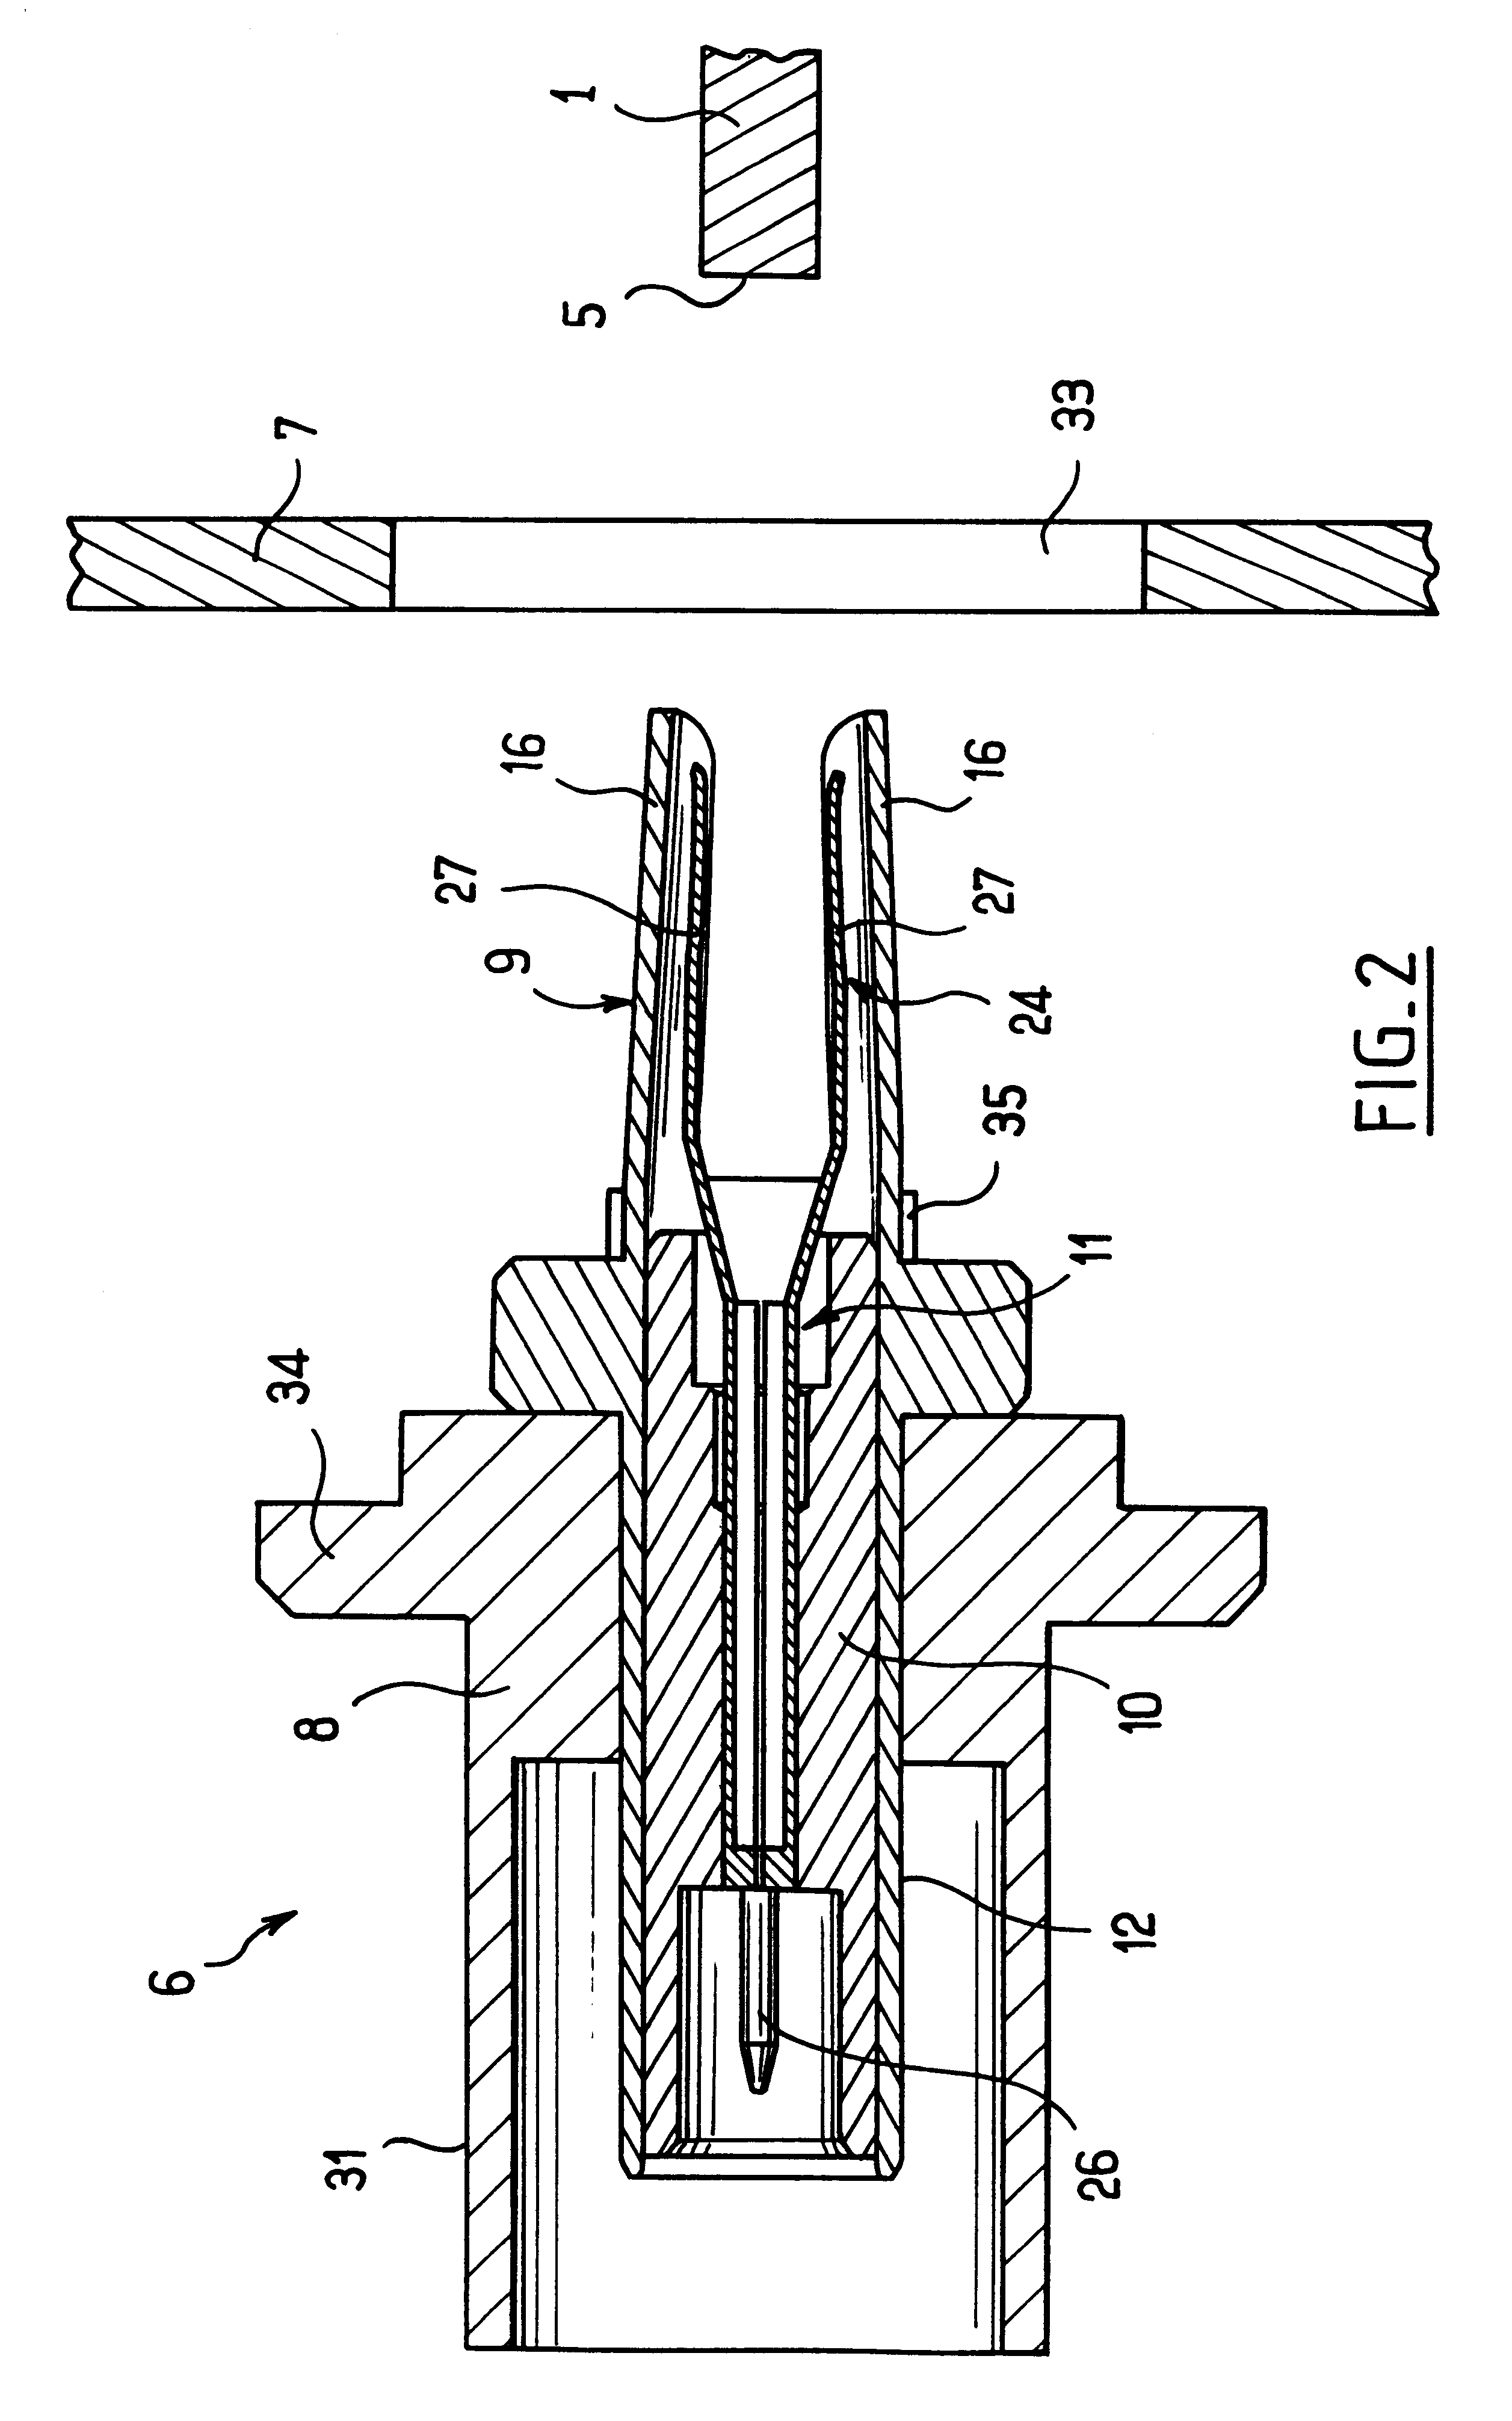 Device for electrically connecting a coaxial line to a printed circuit card